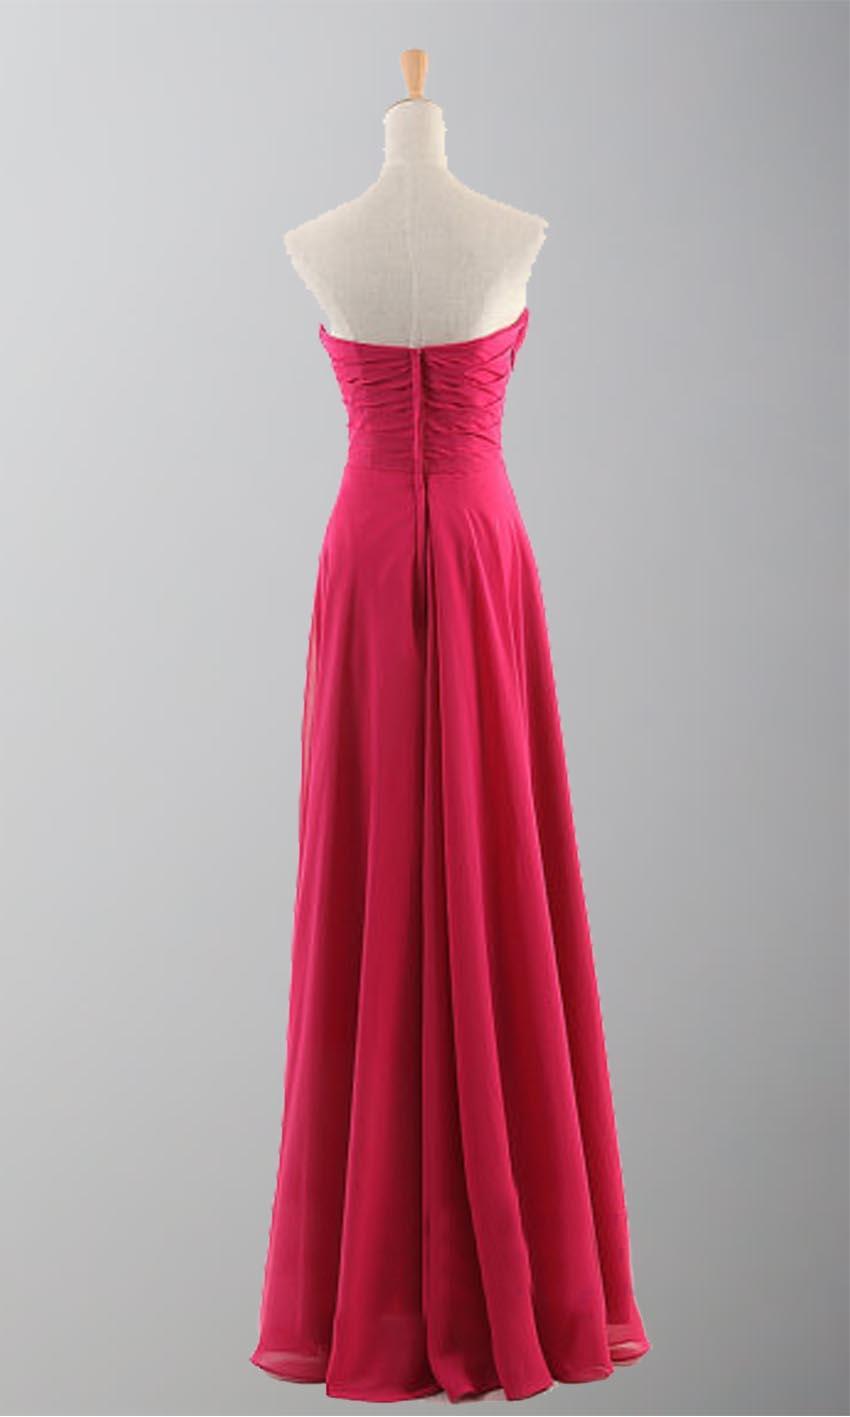 Wedding - Flame Sweetheart Empire Waist Long Prom Dresses KSP172 [KSP172] - £84.00 : Cheap Prom Dresses Uk, Bridesmaid Dresses, 2014 Prom & Evening Dresses, Look for cheap elegant prom dresses 2014, cocktail gowns, or dresses for special occasions? kissprom.co.uk o